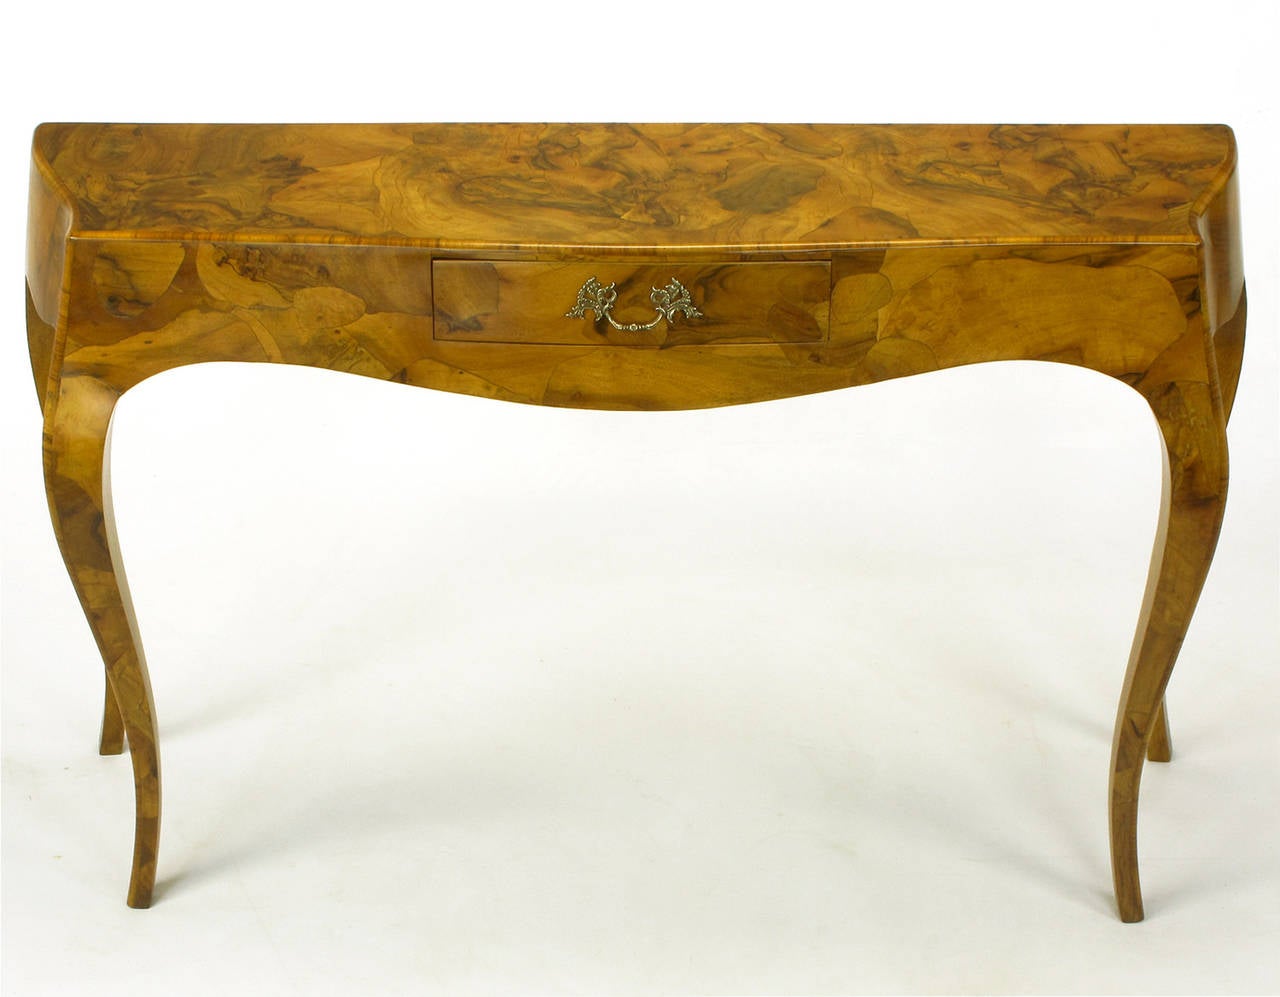 Elegant Italian walnut oyster burl veneered console table. Cabriole legs to the front and rear with bombay front and sides. Finely cast brass filigreed pull. Single center drawer with original interior paper covering.